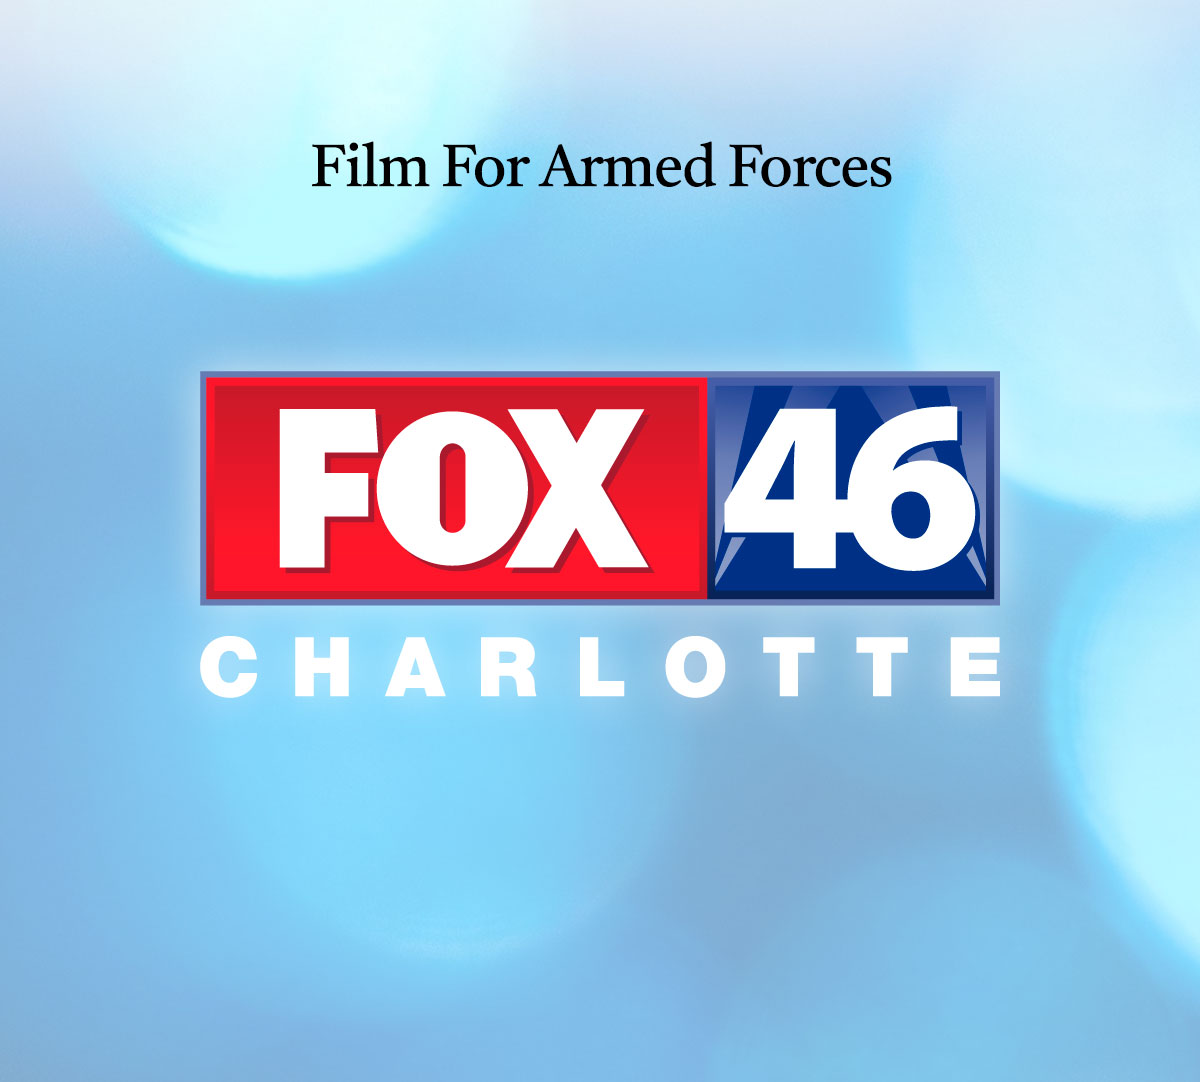 Film For Arm Forces • News